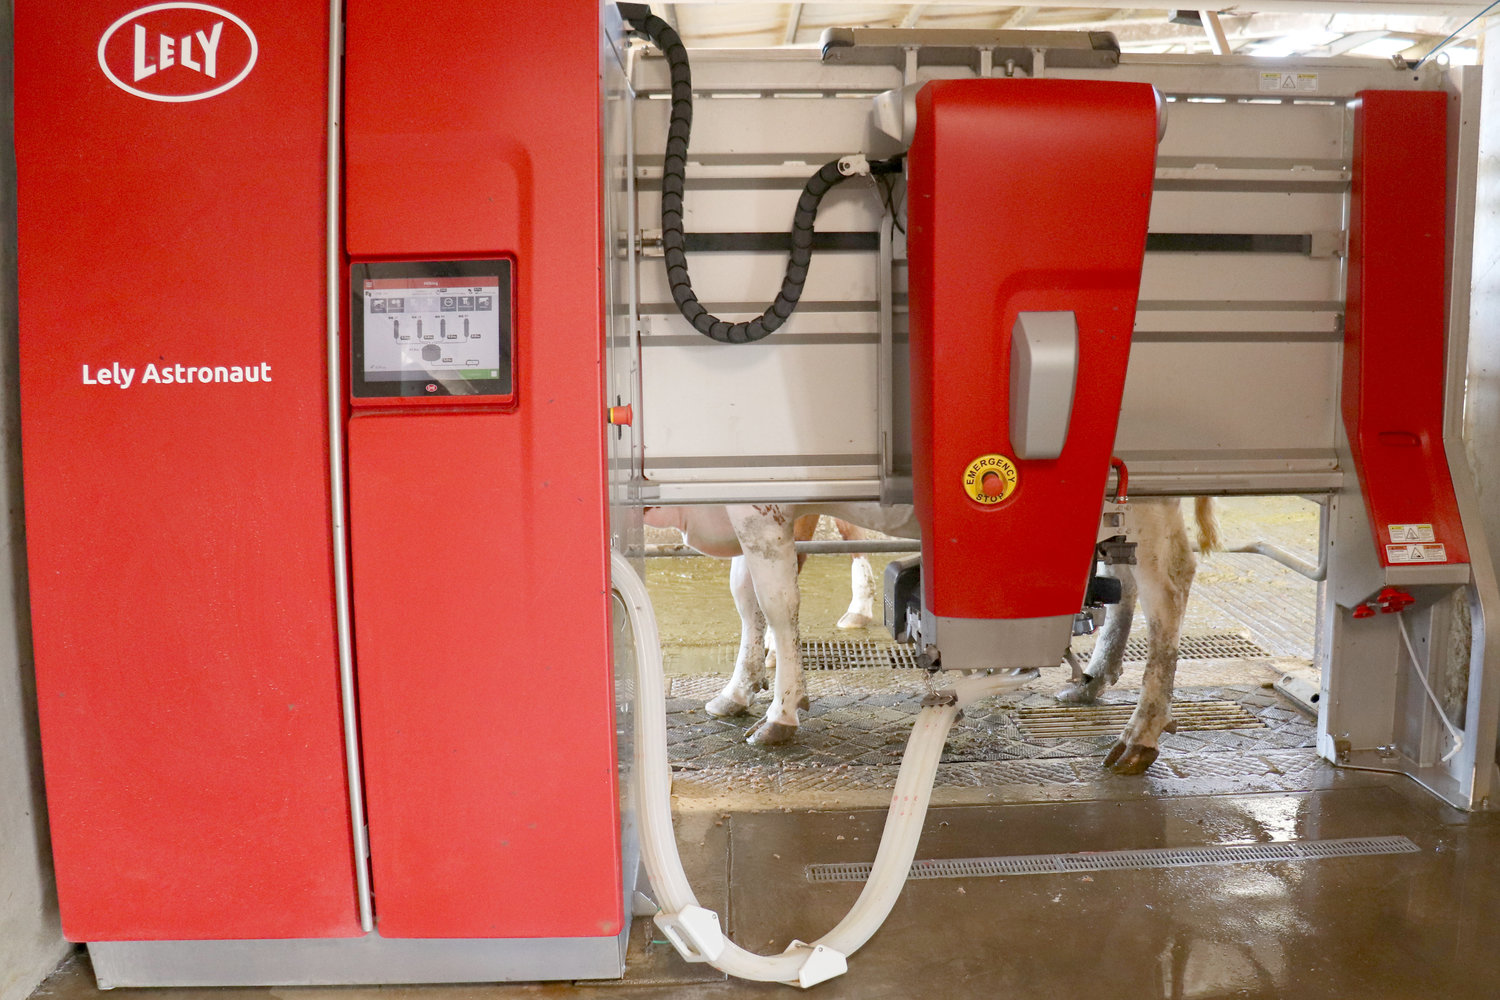 The Lely Astronaut milking robot milks a cow at Sun-Ton Farms in Adna on Friday.